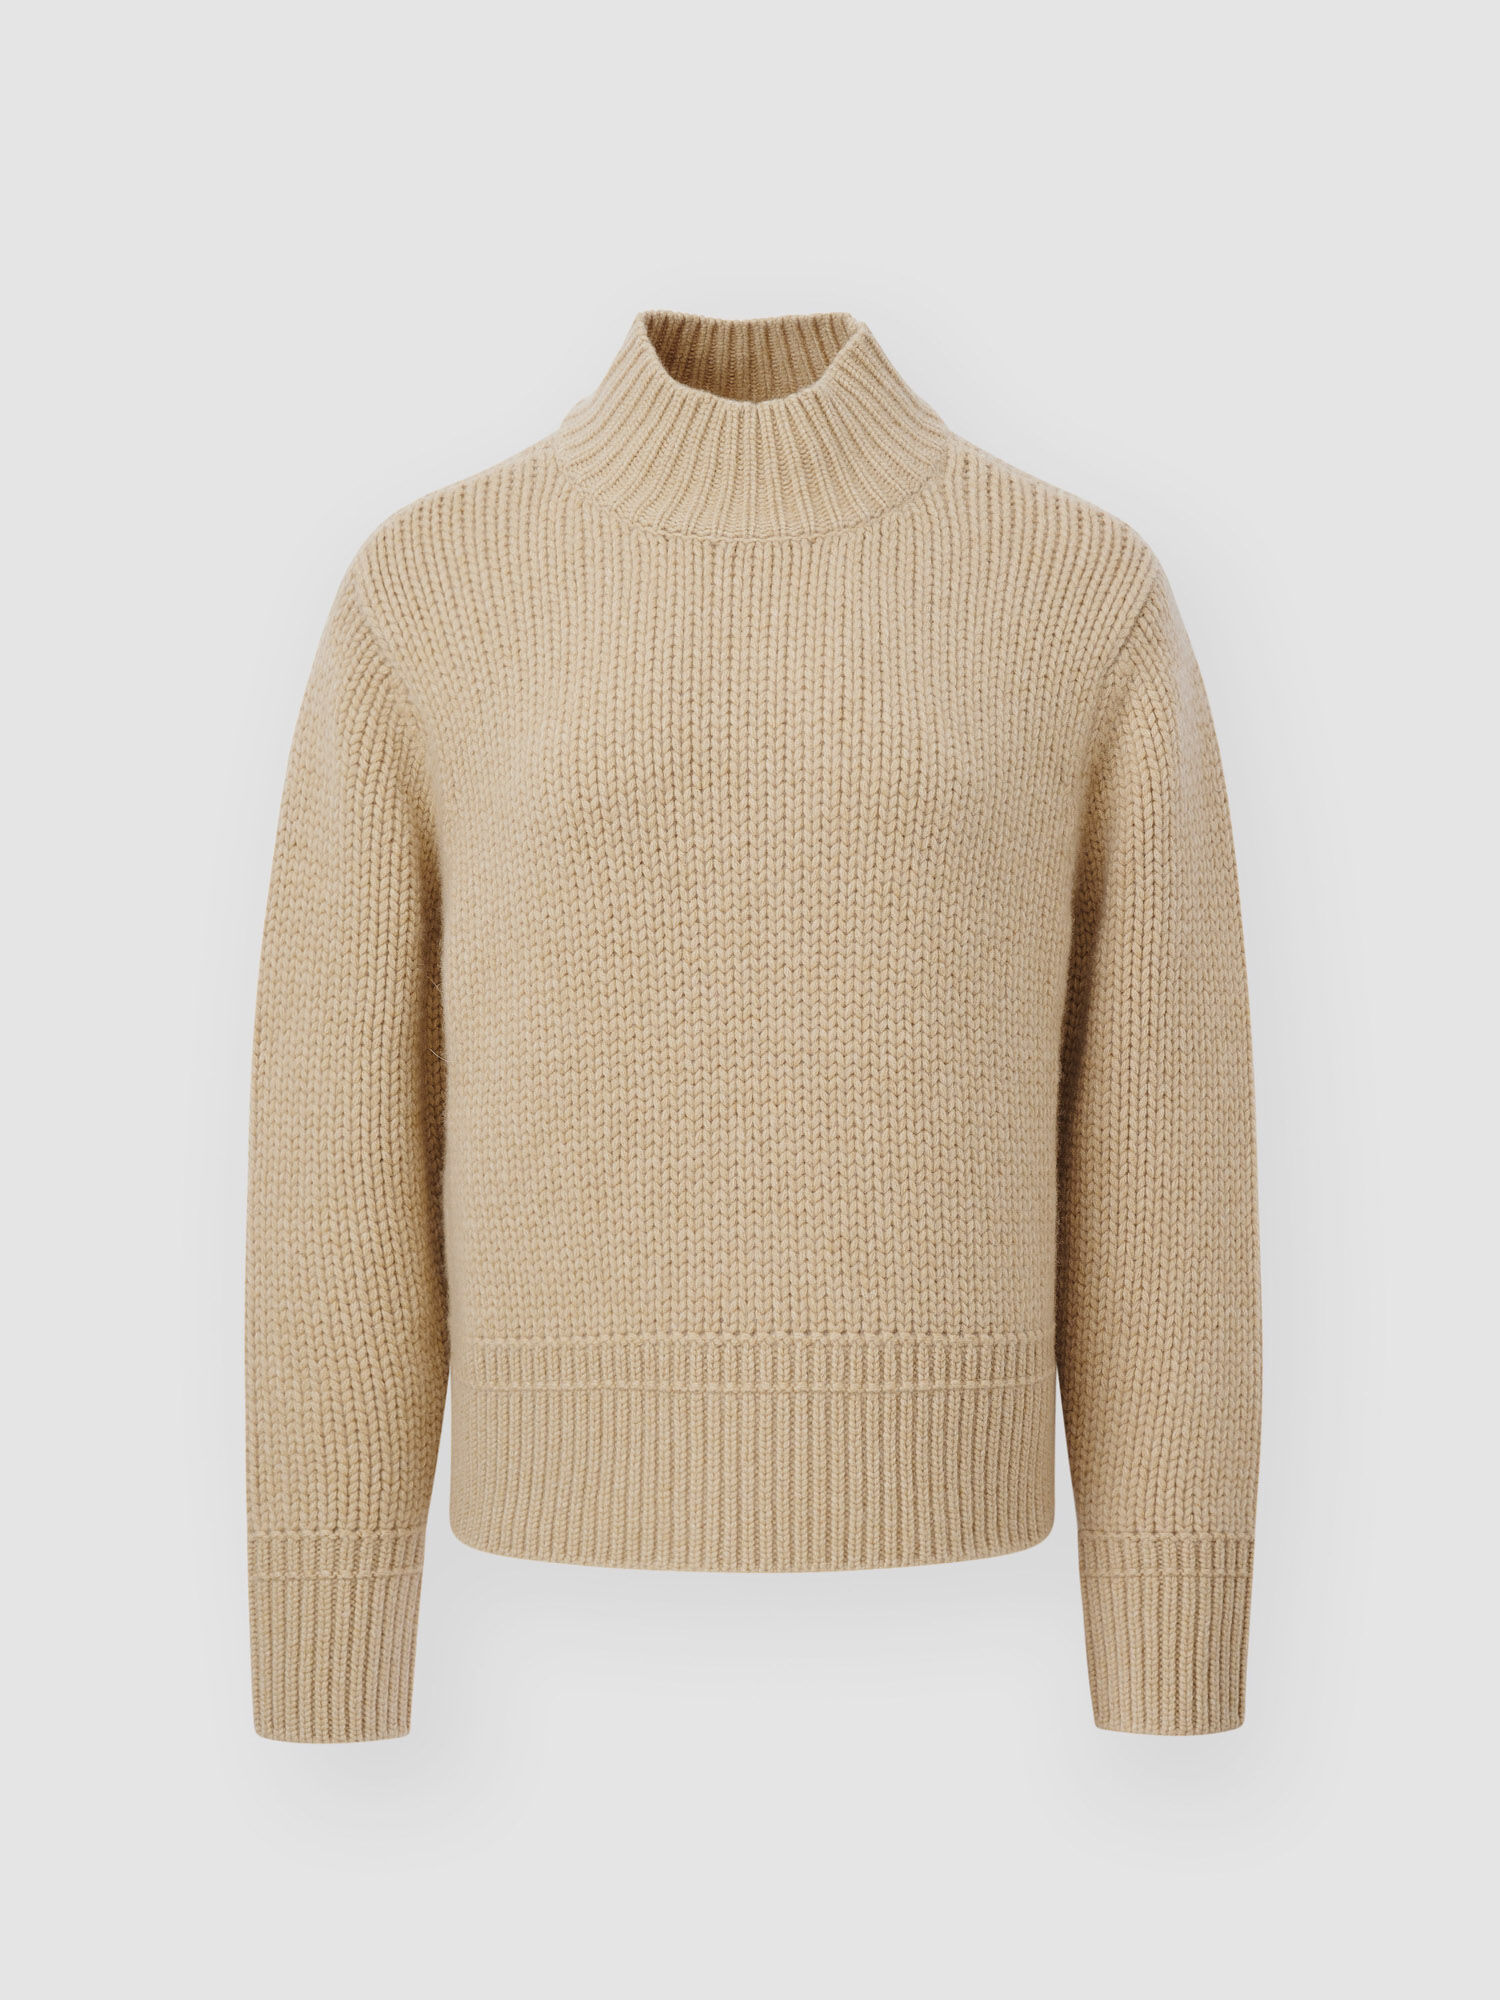 Chunky knit cashmere sweater with stand collar